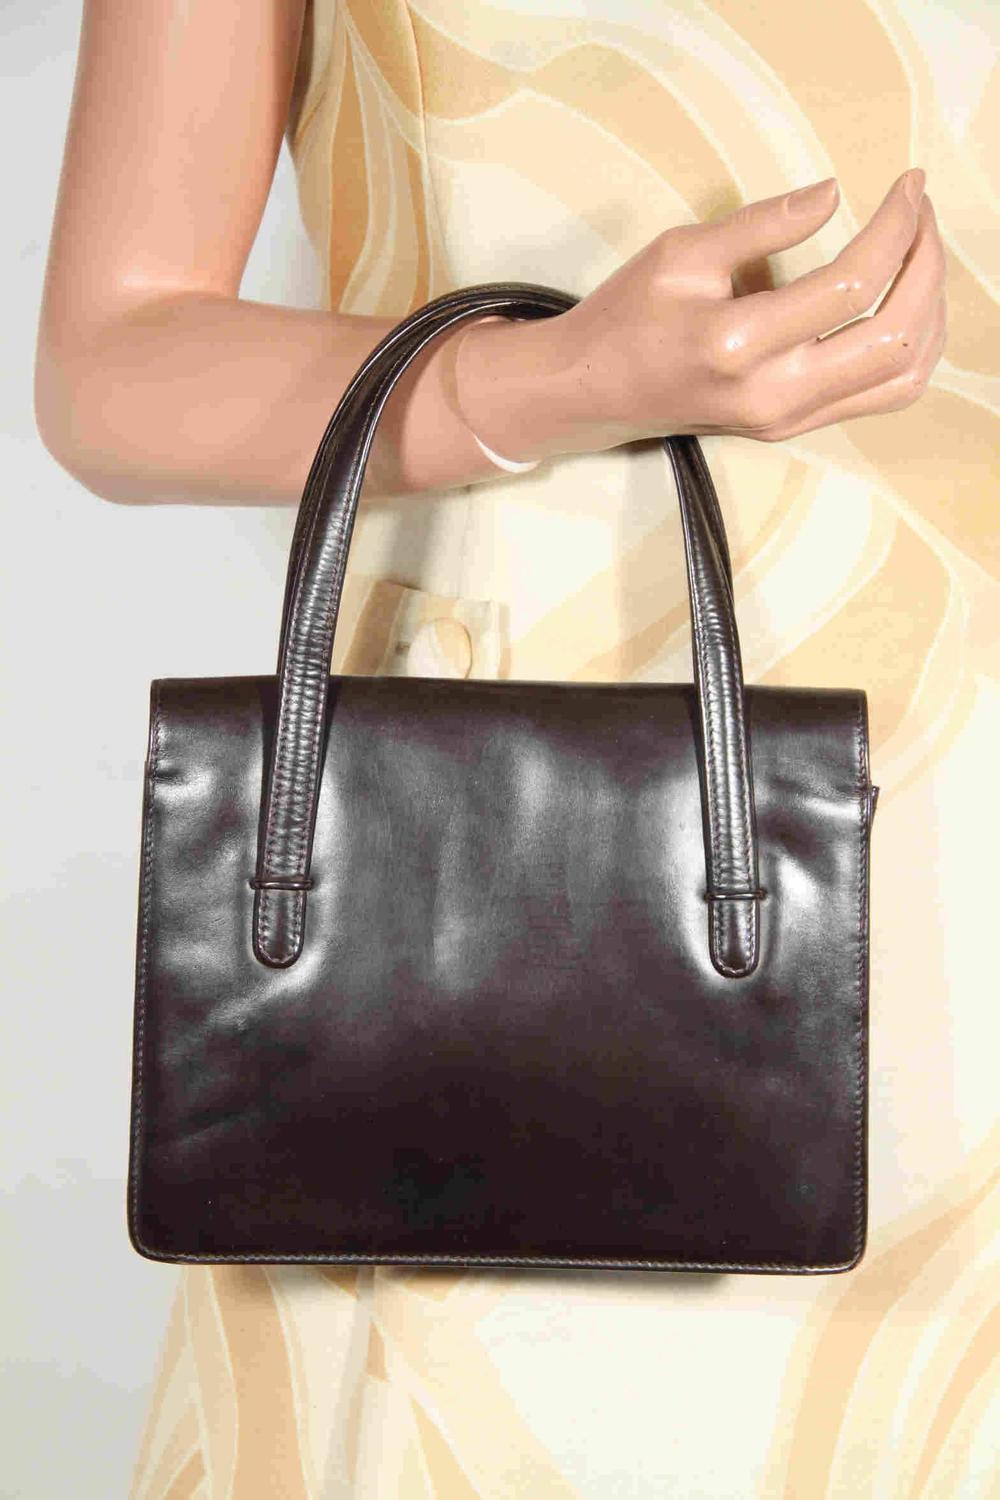 GUCCI Italian VINTAGE Brown Leather HANDBAG Tote PURSE w/ TIGER EYE Stones For Sale at 1stdibs